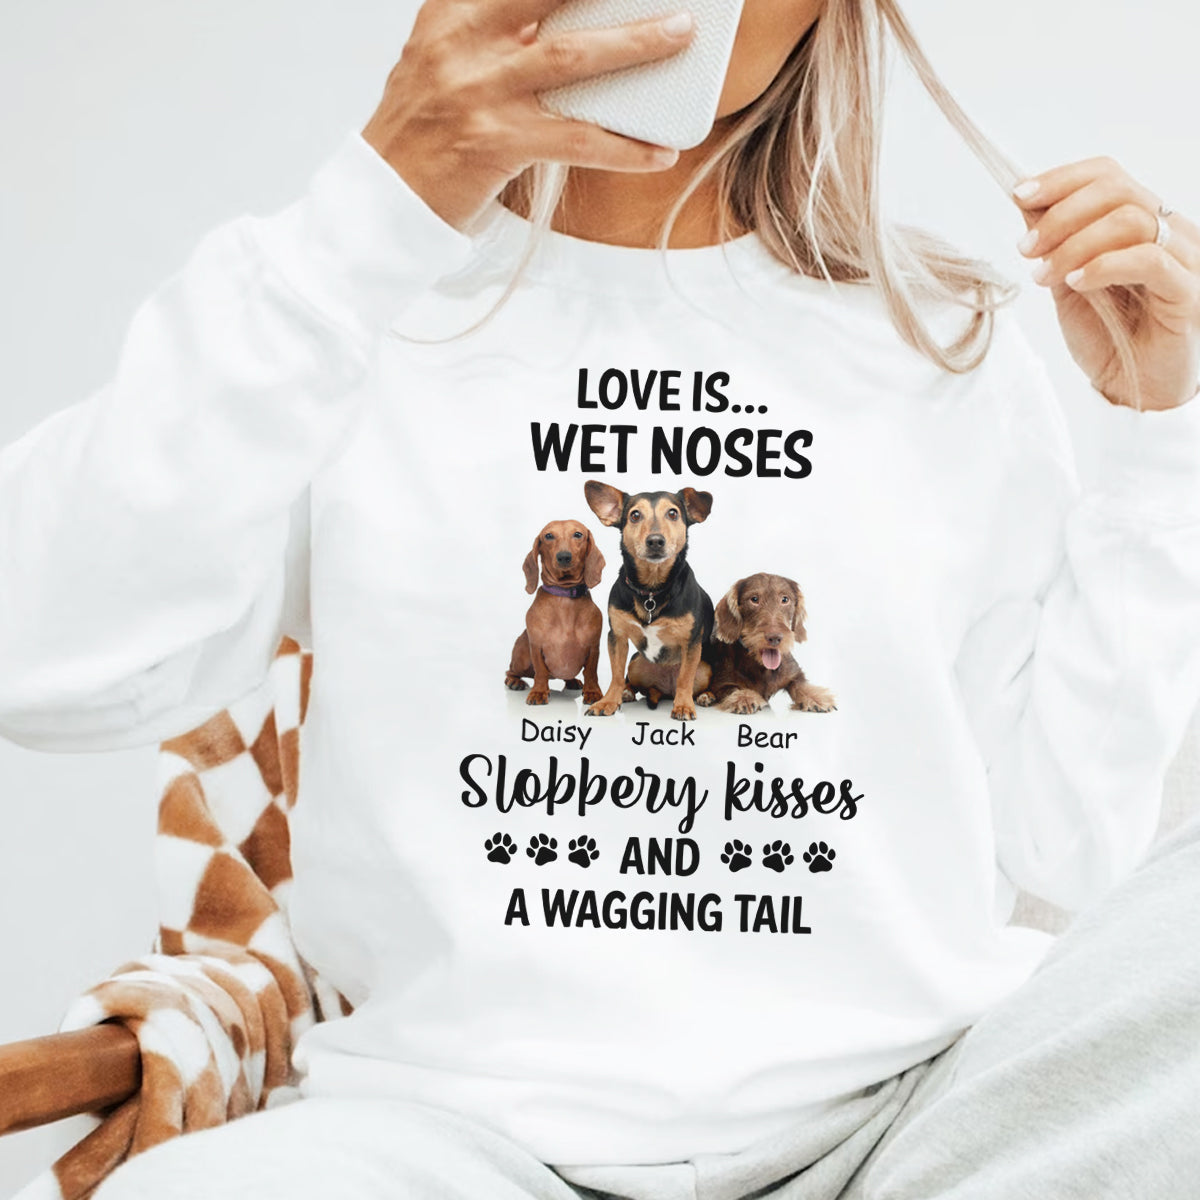 Love Is Wet Noses, Slobbery Kisses, And A Wagging Tail - Personalized Custom Dog Photo Shirt banner1_fe11489a-4bae-49db-8c3b-76985e6f0ac4.jpg?v=1712821759